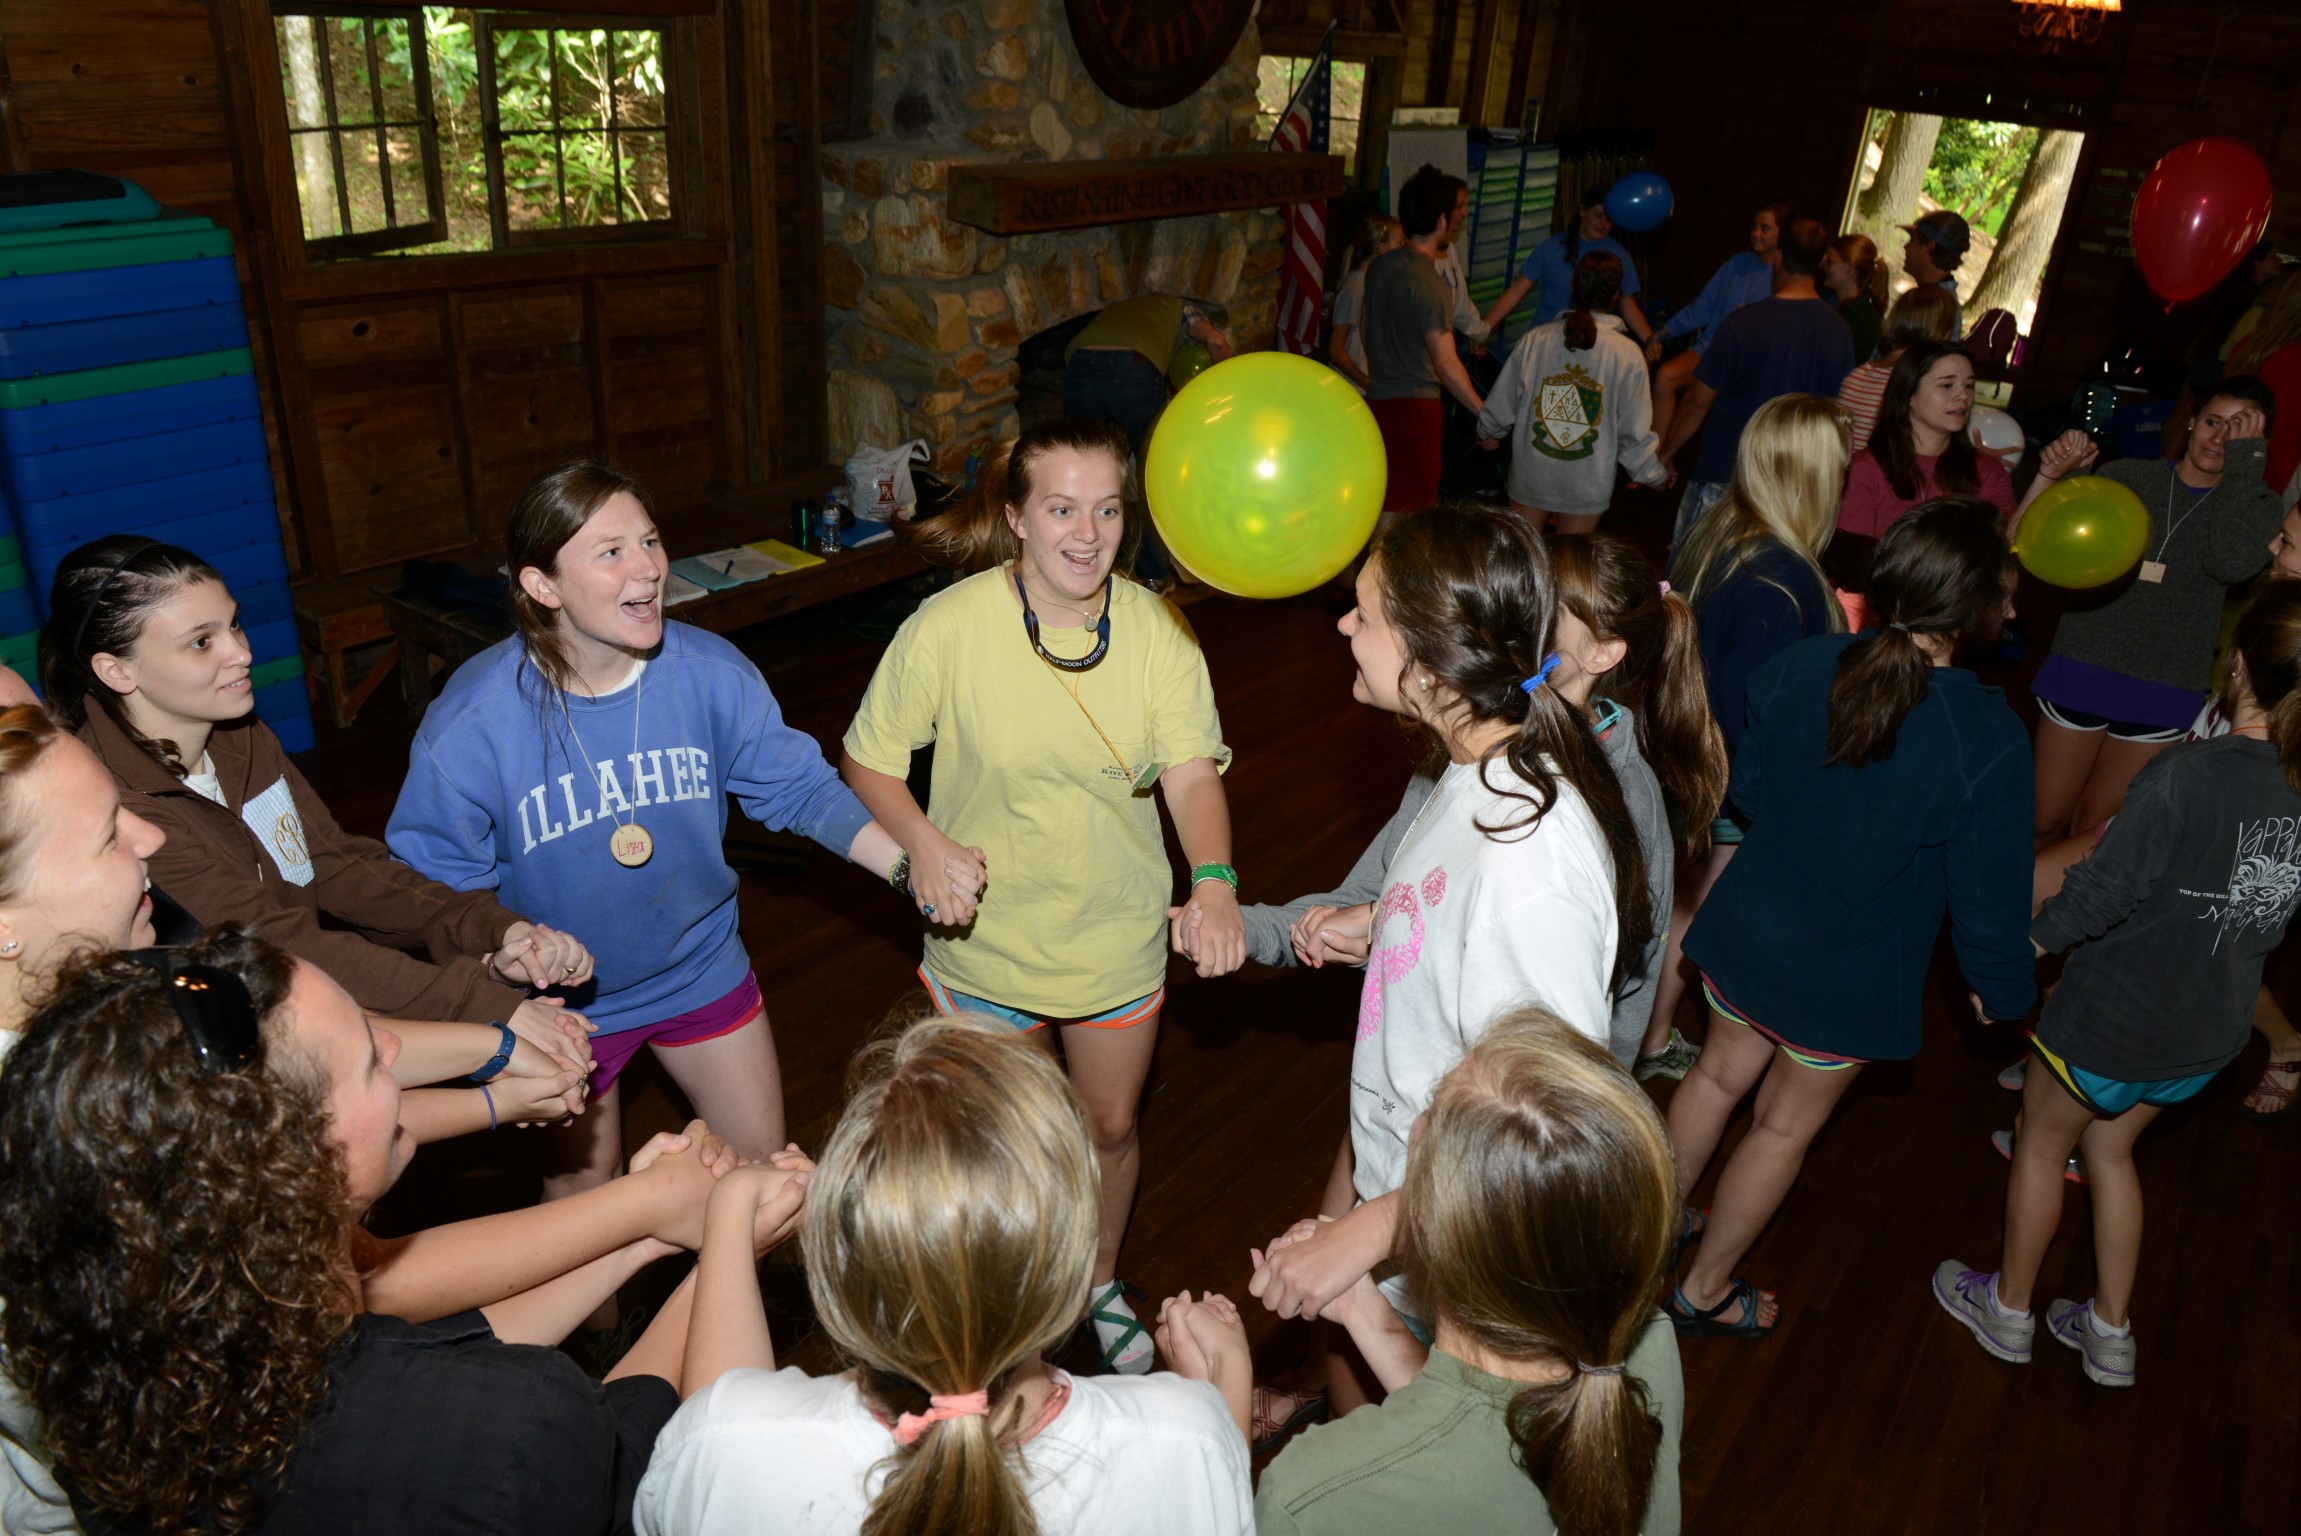 Camp Illahee counselors holding hands during orientation, keeping a yellow balloon in the air.